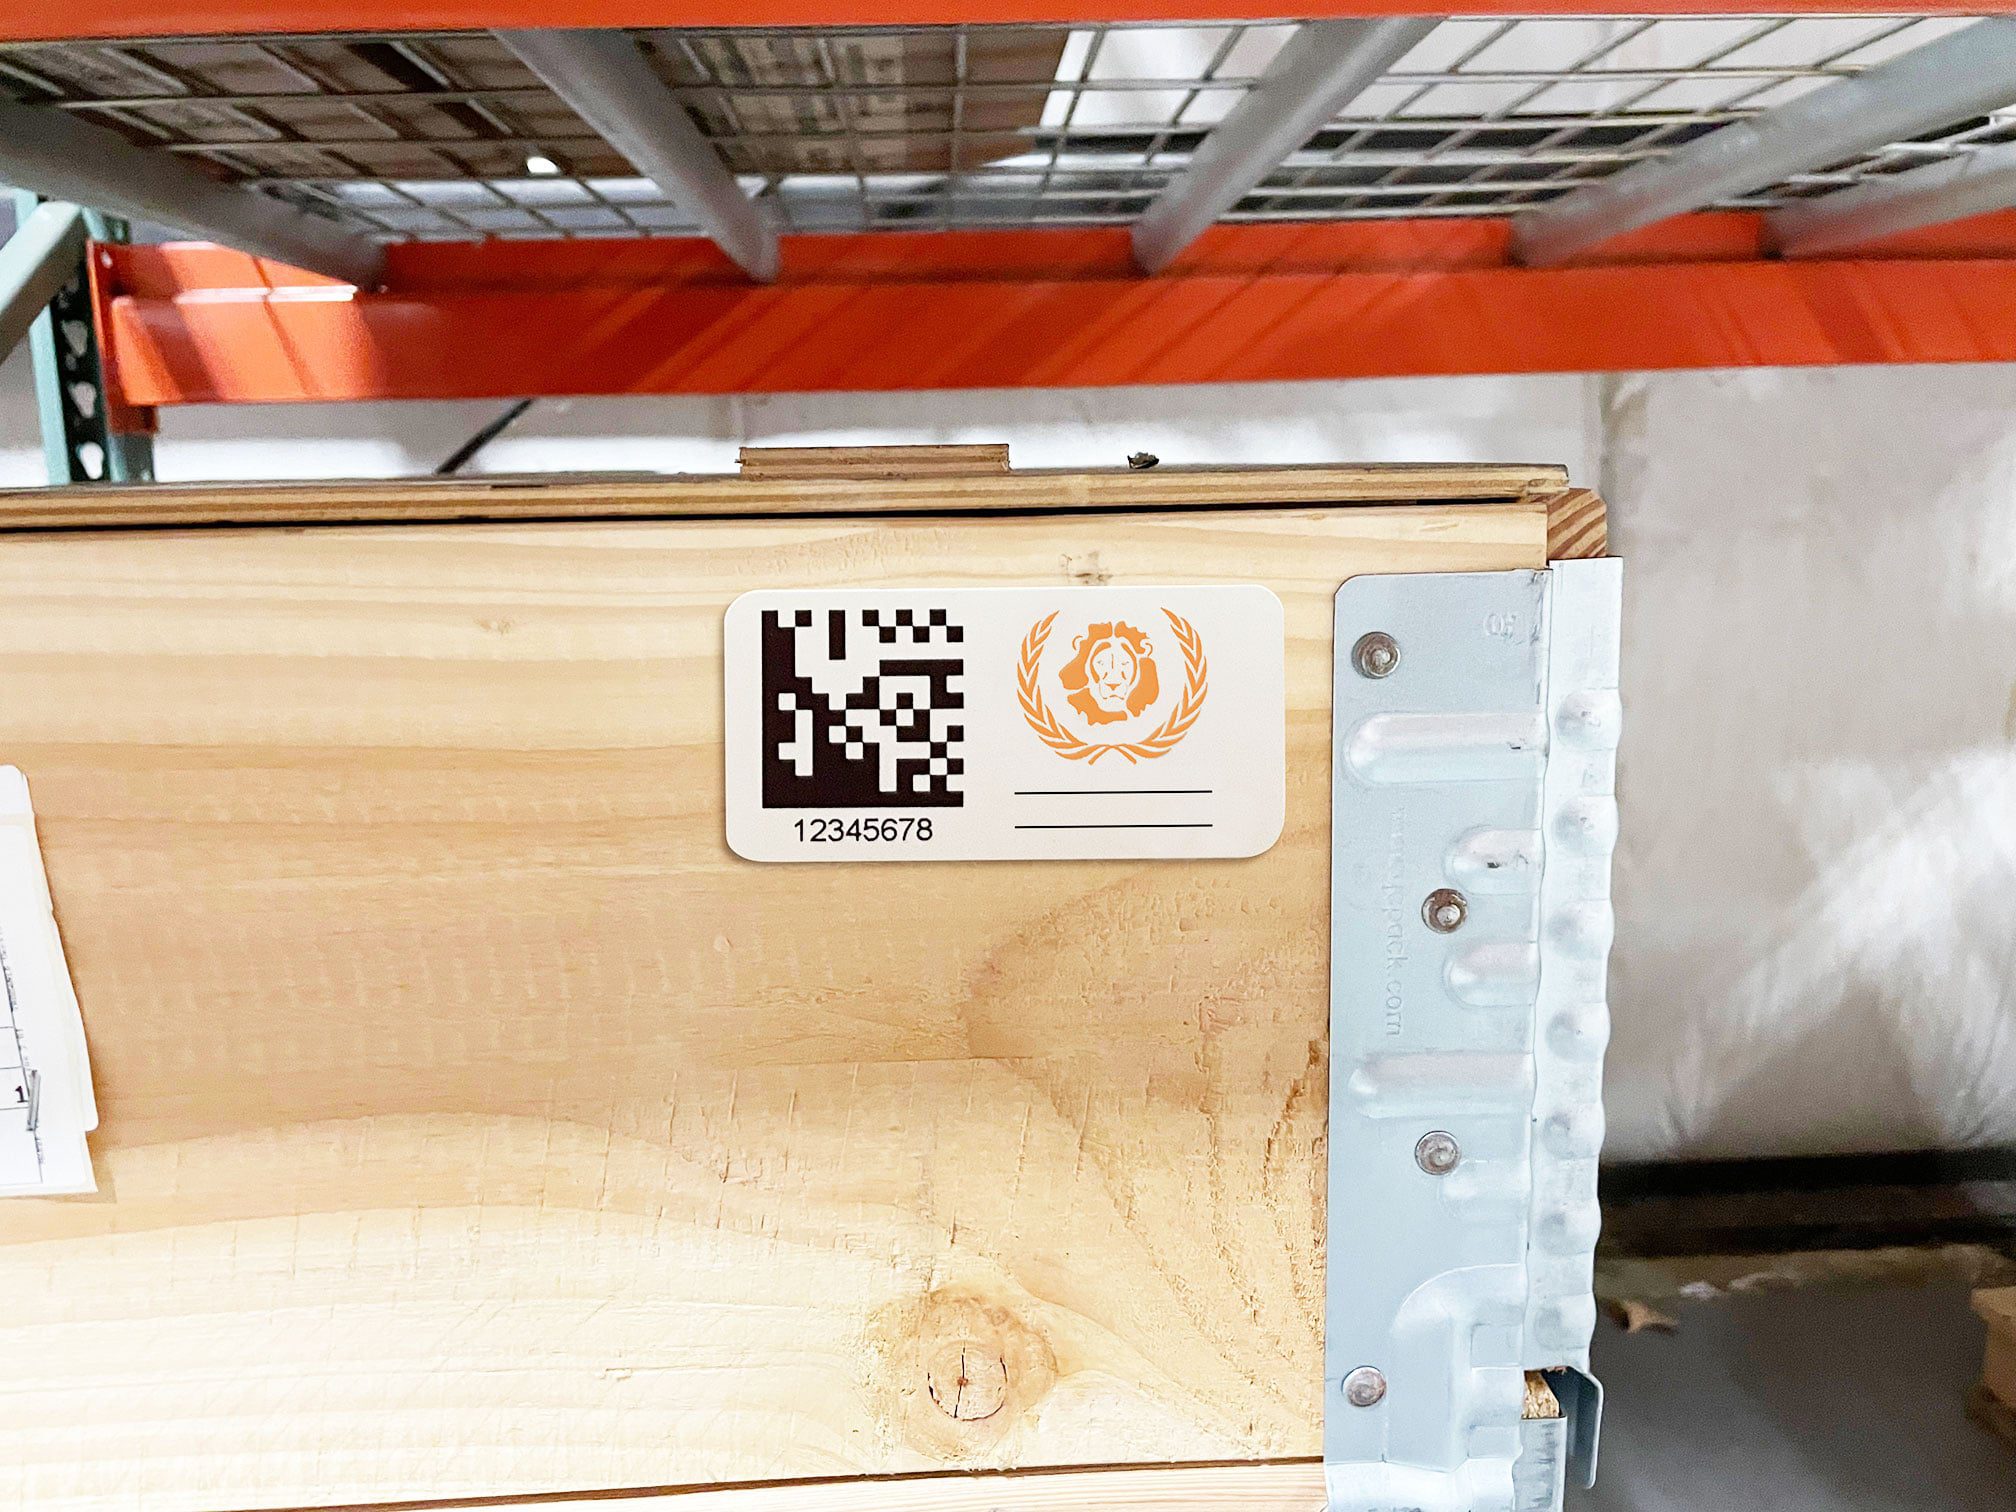 long-term asset label on wood storage crate in warehouse racking